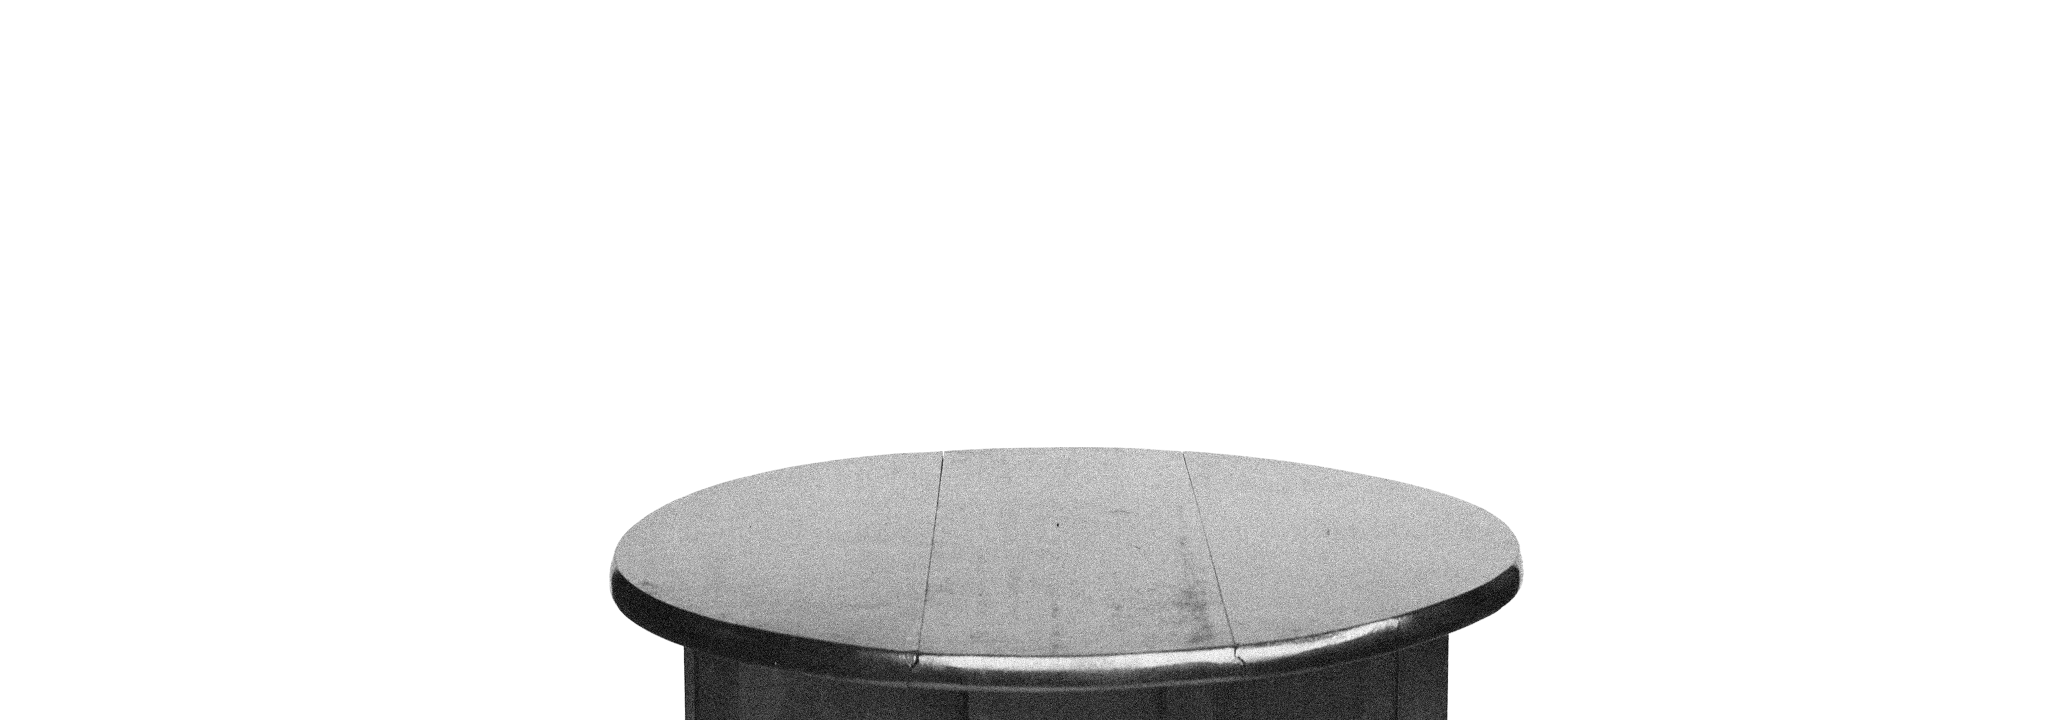 A black and white photo of an oval dining table